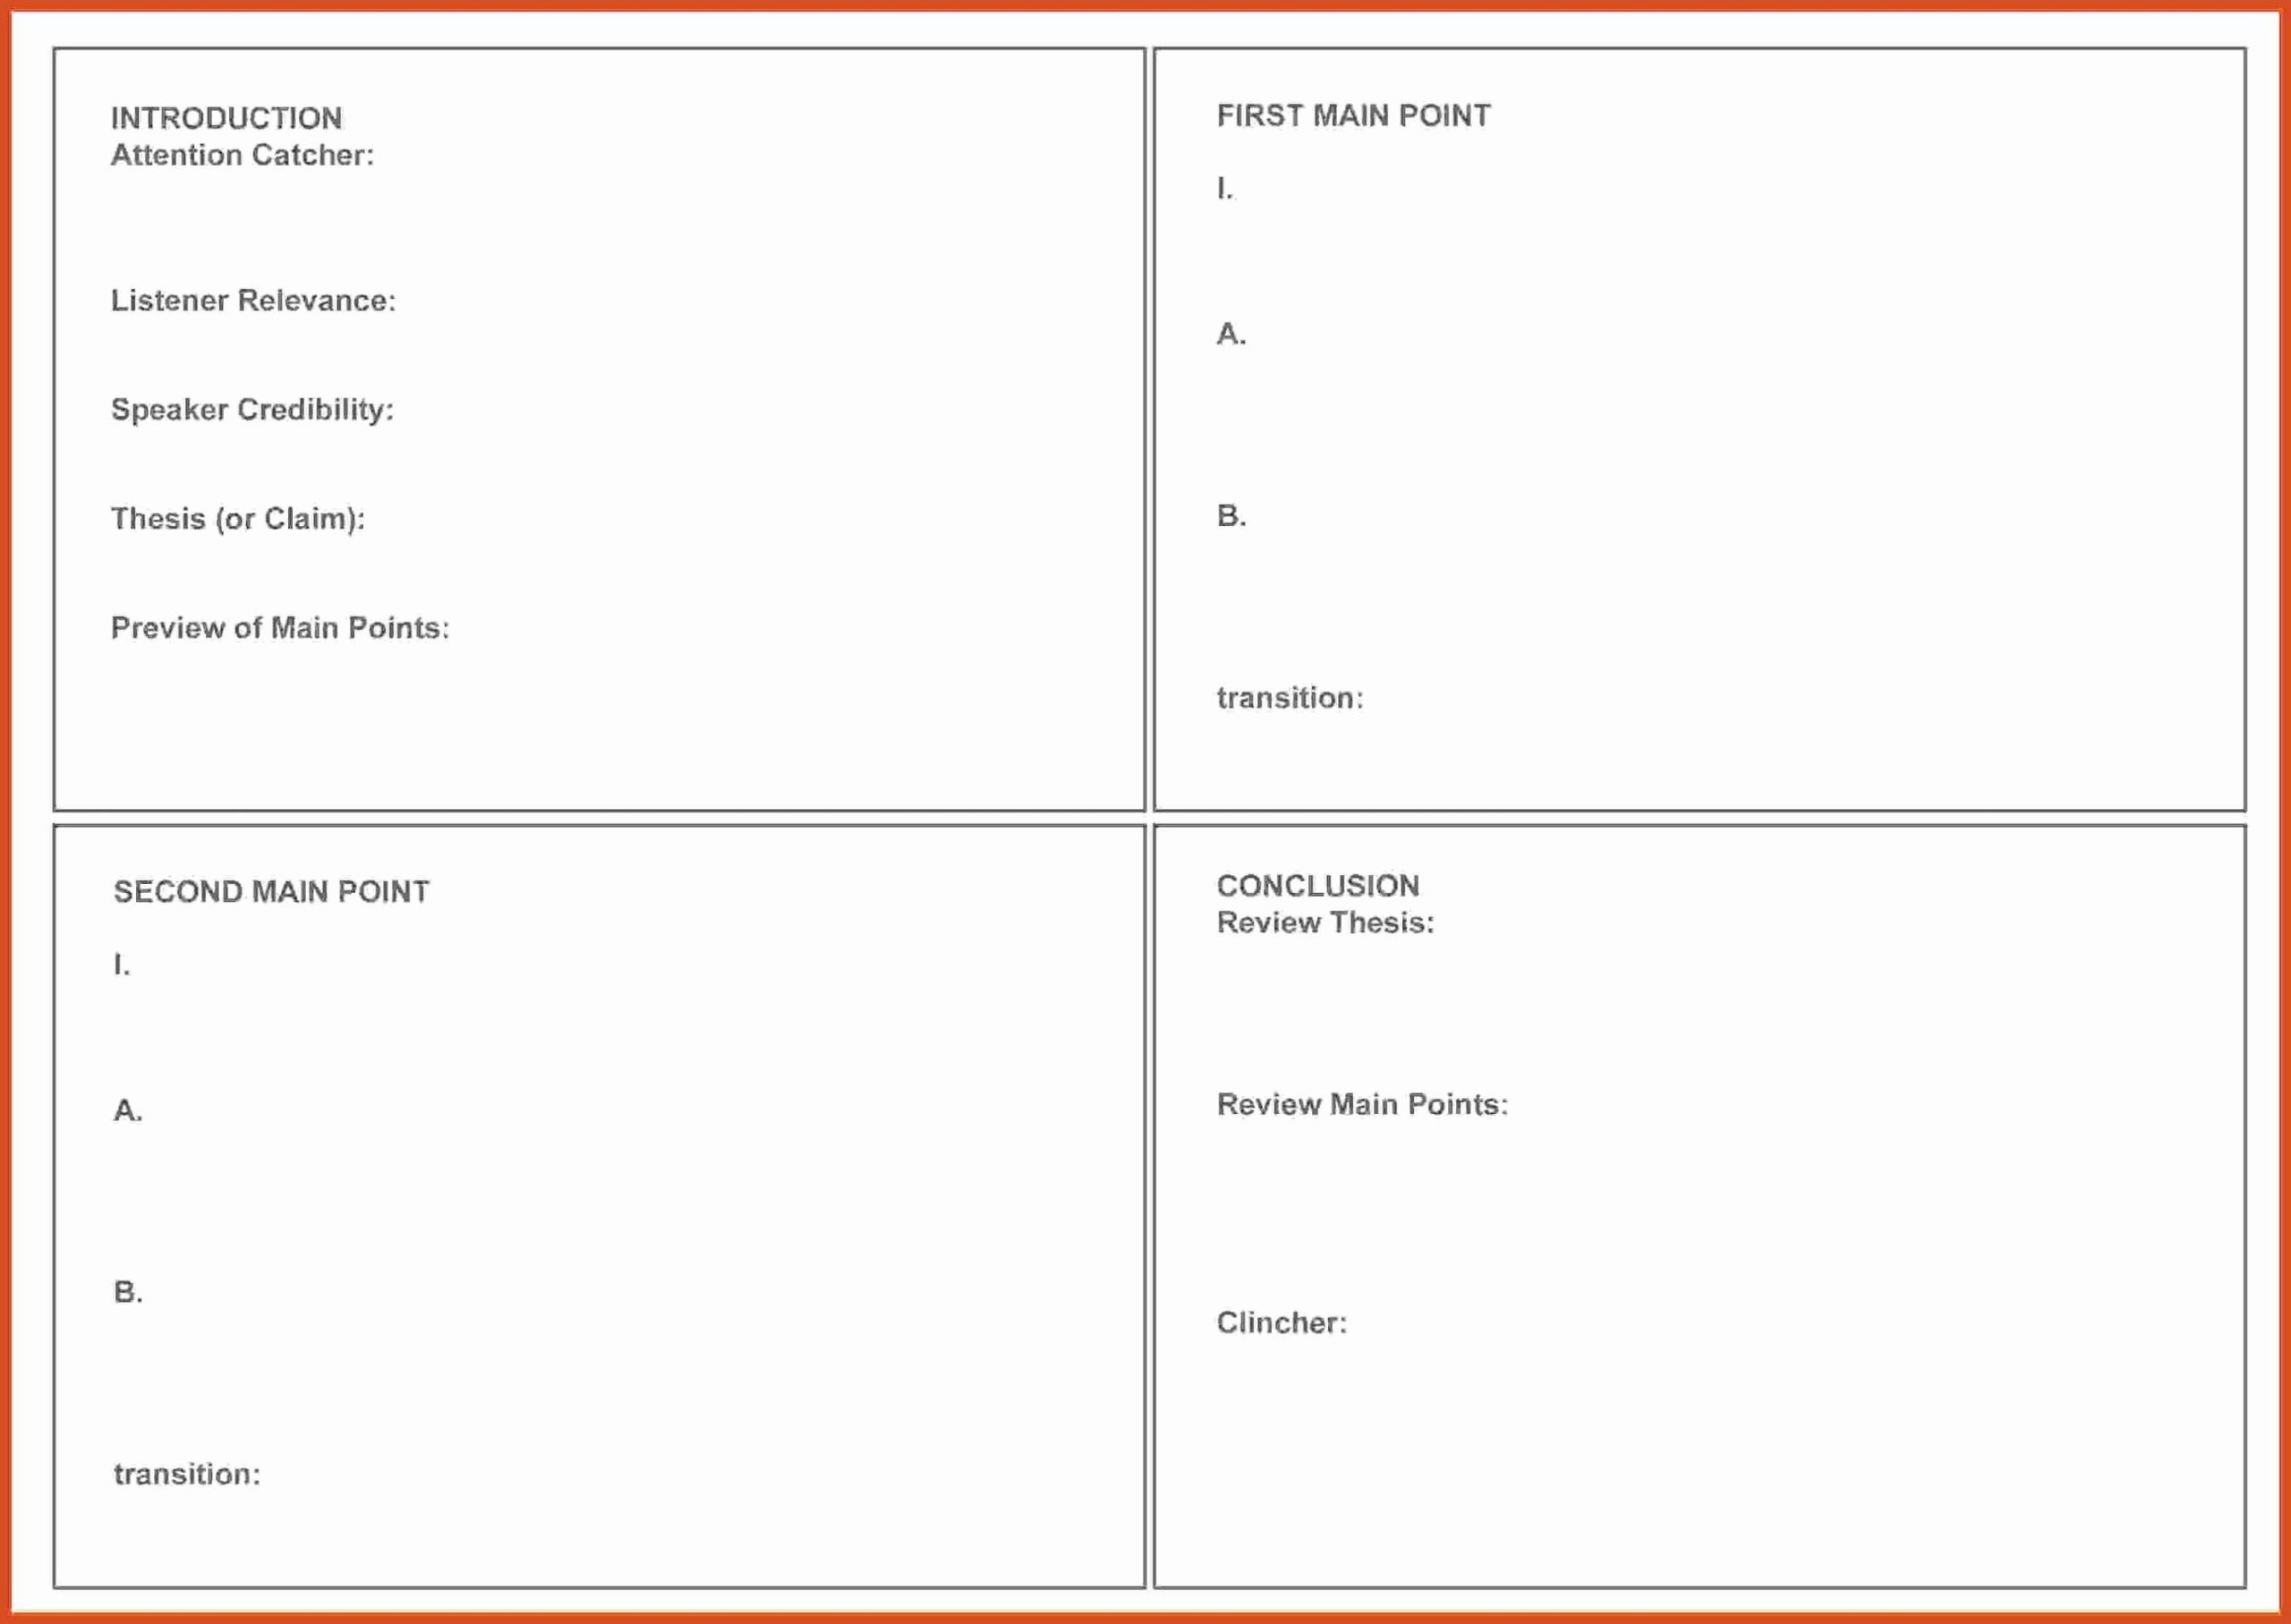 Image Result For Cute Free Index Card Template | Organization - Free Printable Blank Index Cards For Blank Index Card Template